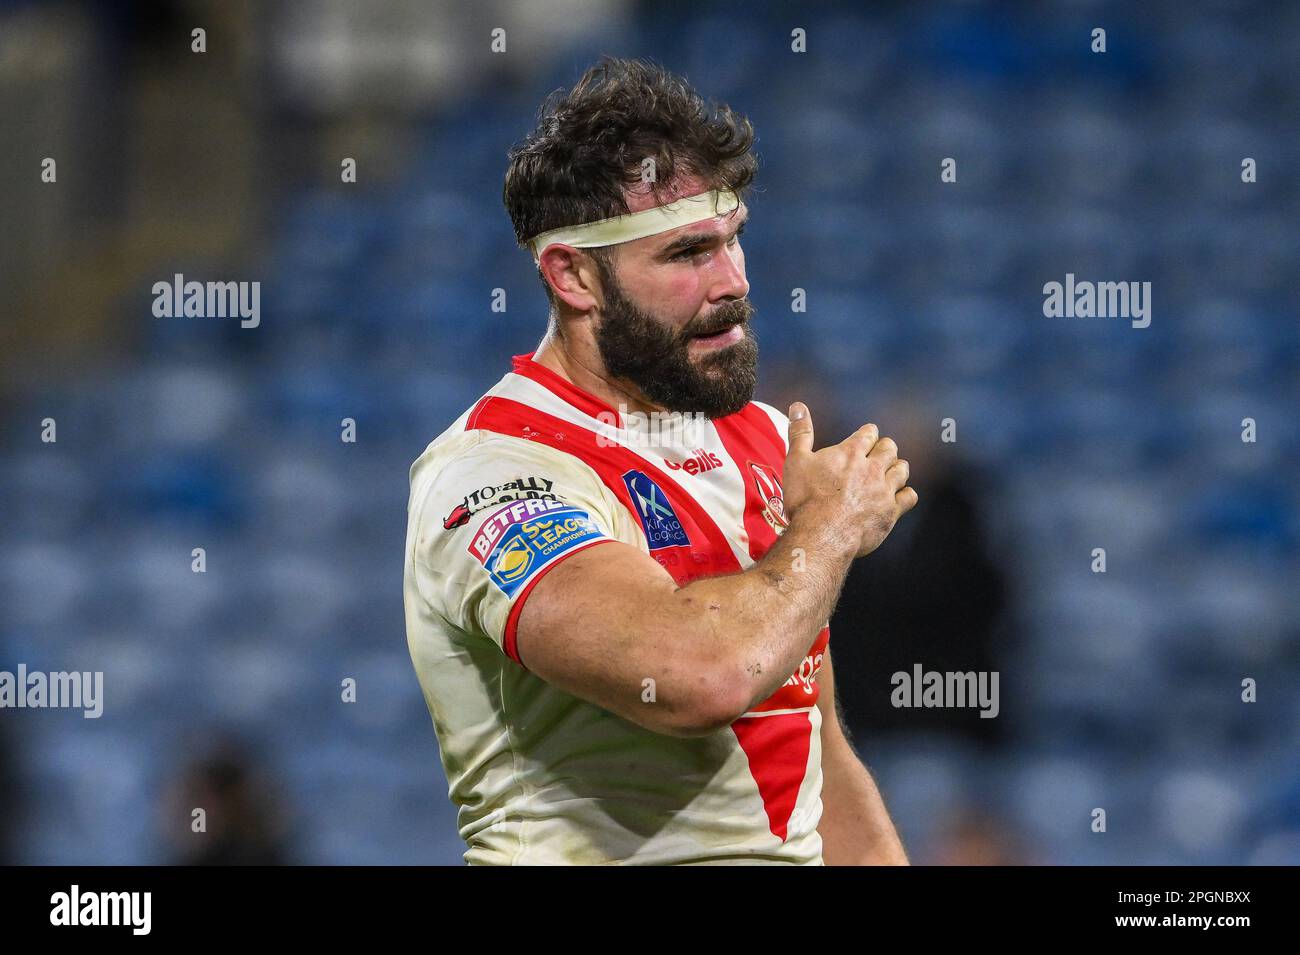 Alex Walmsley #8 of St Helens pats the st. Helens crest on his shirt to the fans at the end of the Betfred Super League Round 6 match Huddersfield Giants vs St Helens at John Smith's Stadium, Huddersfield, United Kingdom, 23rd March 2023  (Photo by Craig Thomas/News Images) Stock Photo